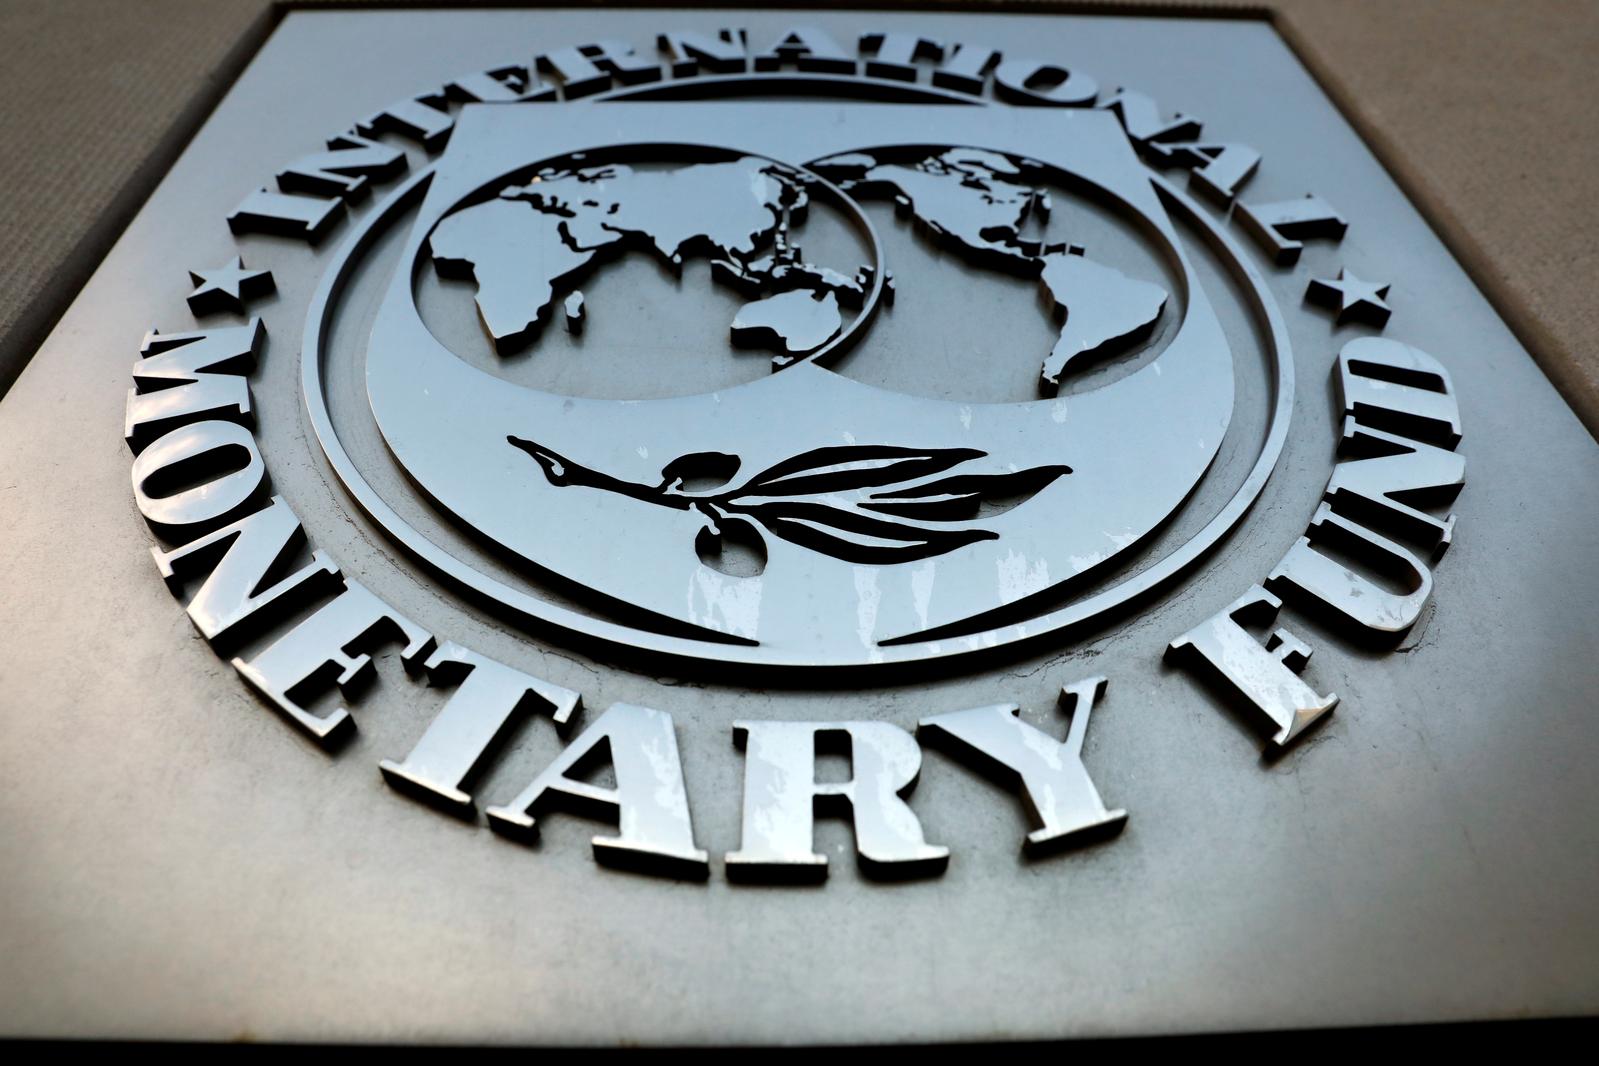 IMF sees signs of stronger global recovery, but significant risks remain